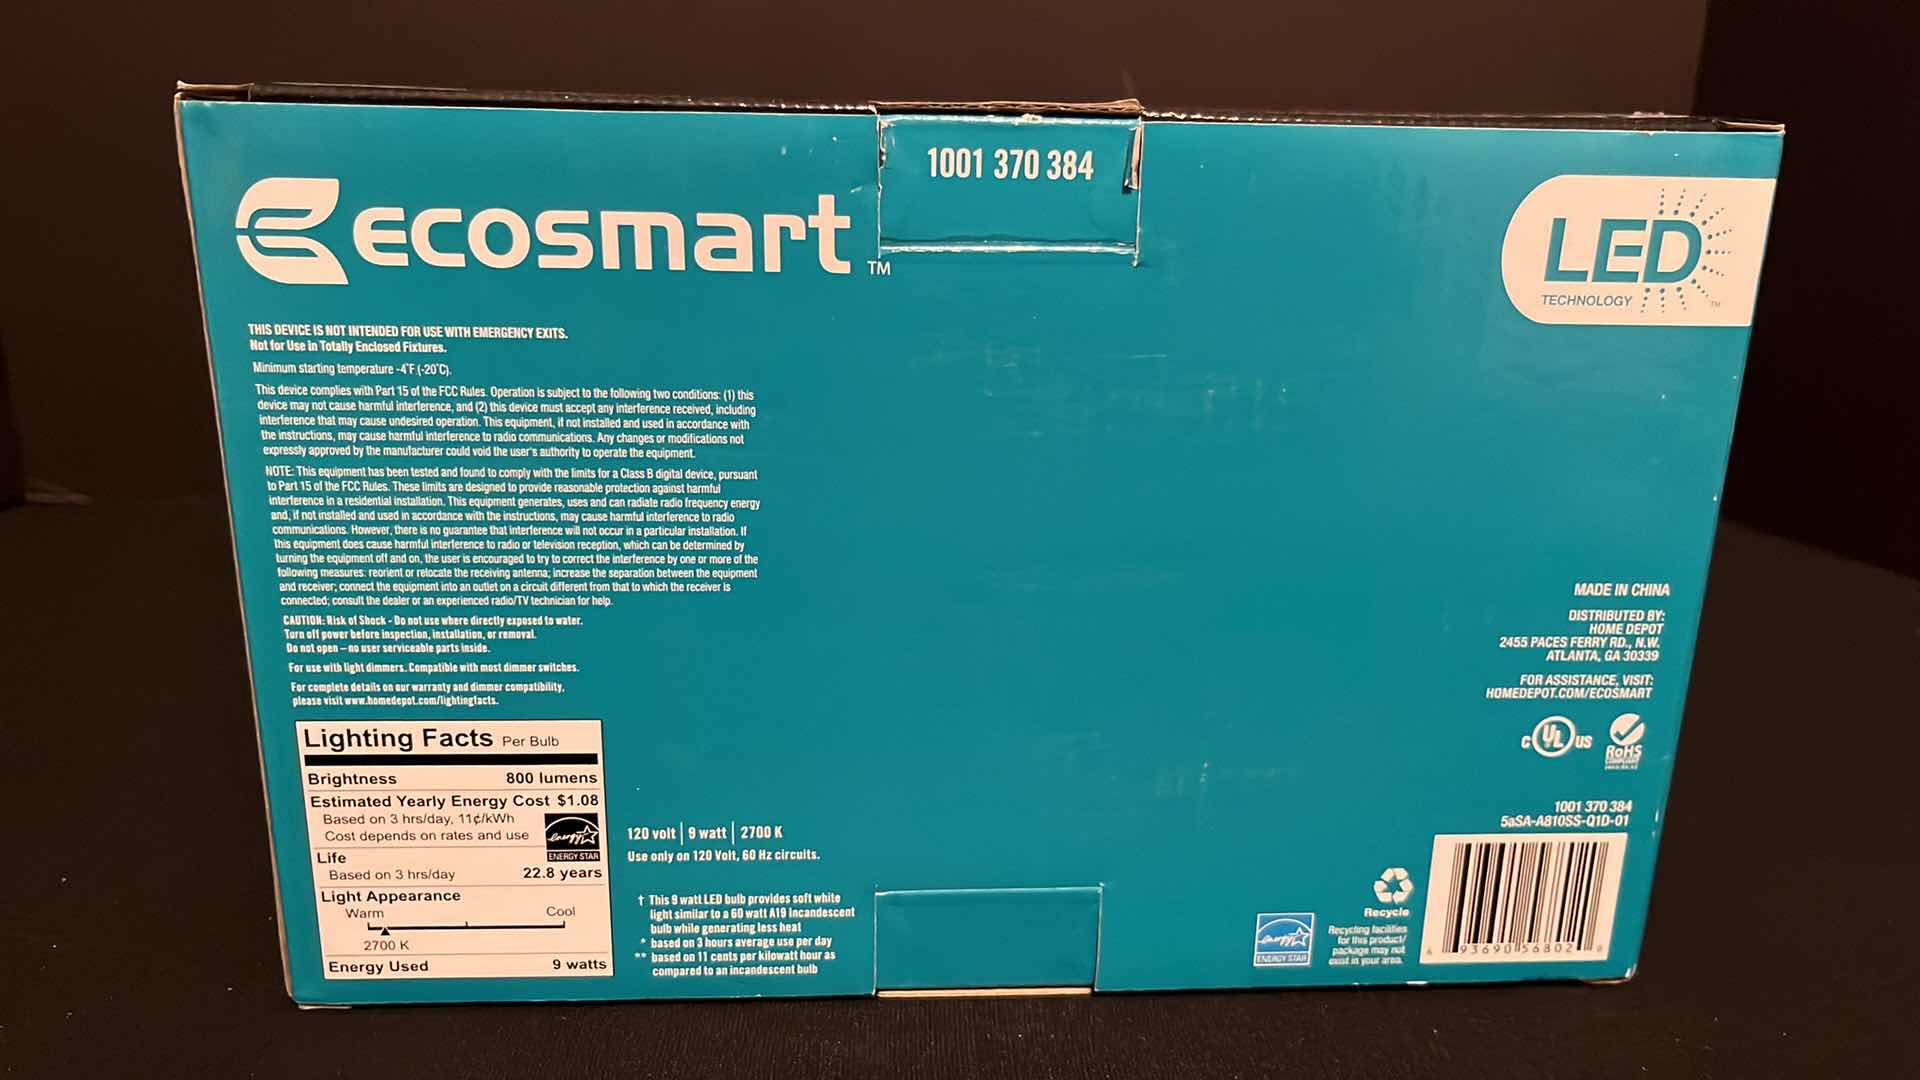 Photo 3 of NIB ECOSMART 4-PACK 60W A19 DIMMABLE ENERGY STAR LED LIGHT BULB SOFT WHITE & INTERMATIC AUTOMATIC LIGHT CONTROL DUSK TO DAWN LIGHT SENSING SOCKET CONVERTER, INDOOR/OUTDOOR 150W AT 120 VAC (MODEL NE1C)